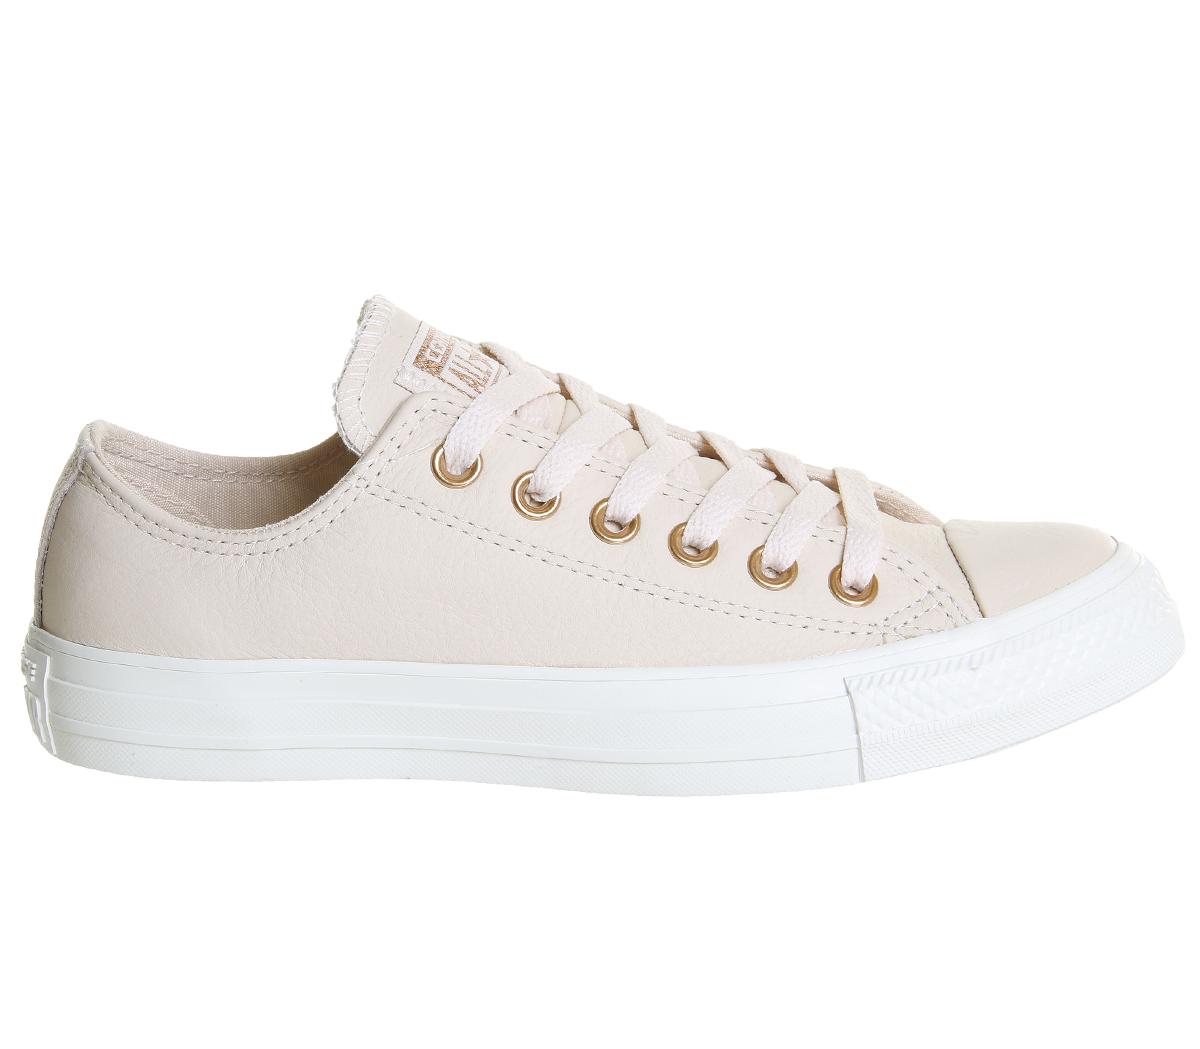 converse all star low leather pastel rose tan